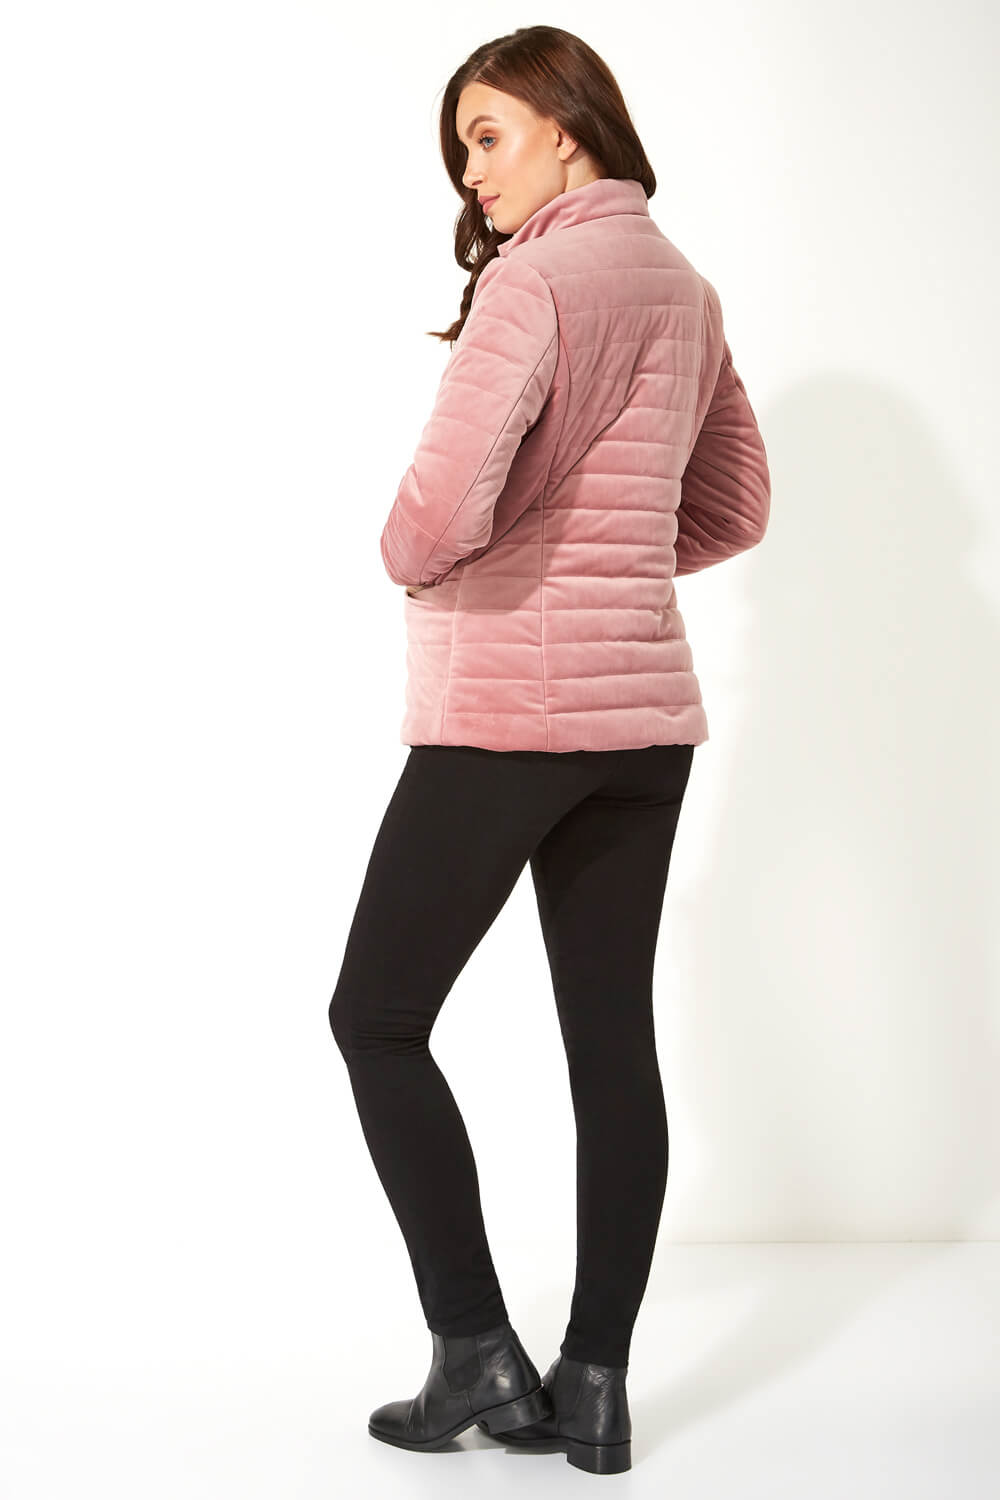 PINK Velour Texture Quilted Jacket, Image 3 of 5